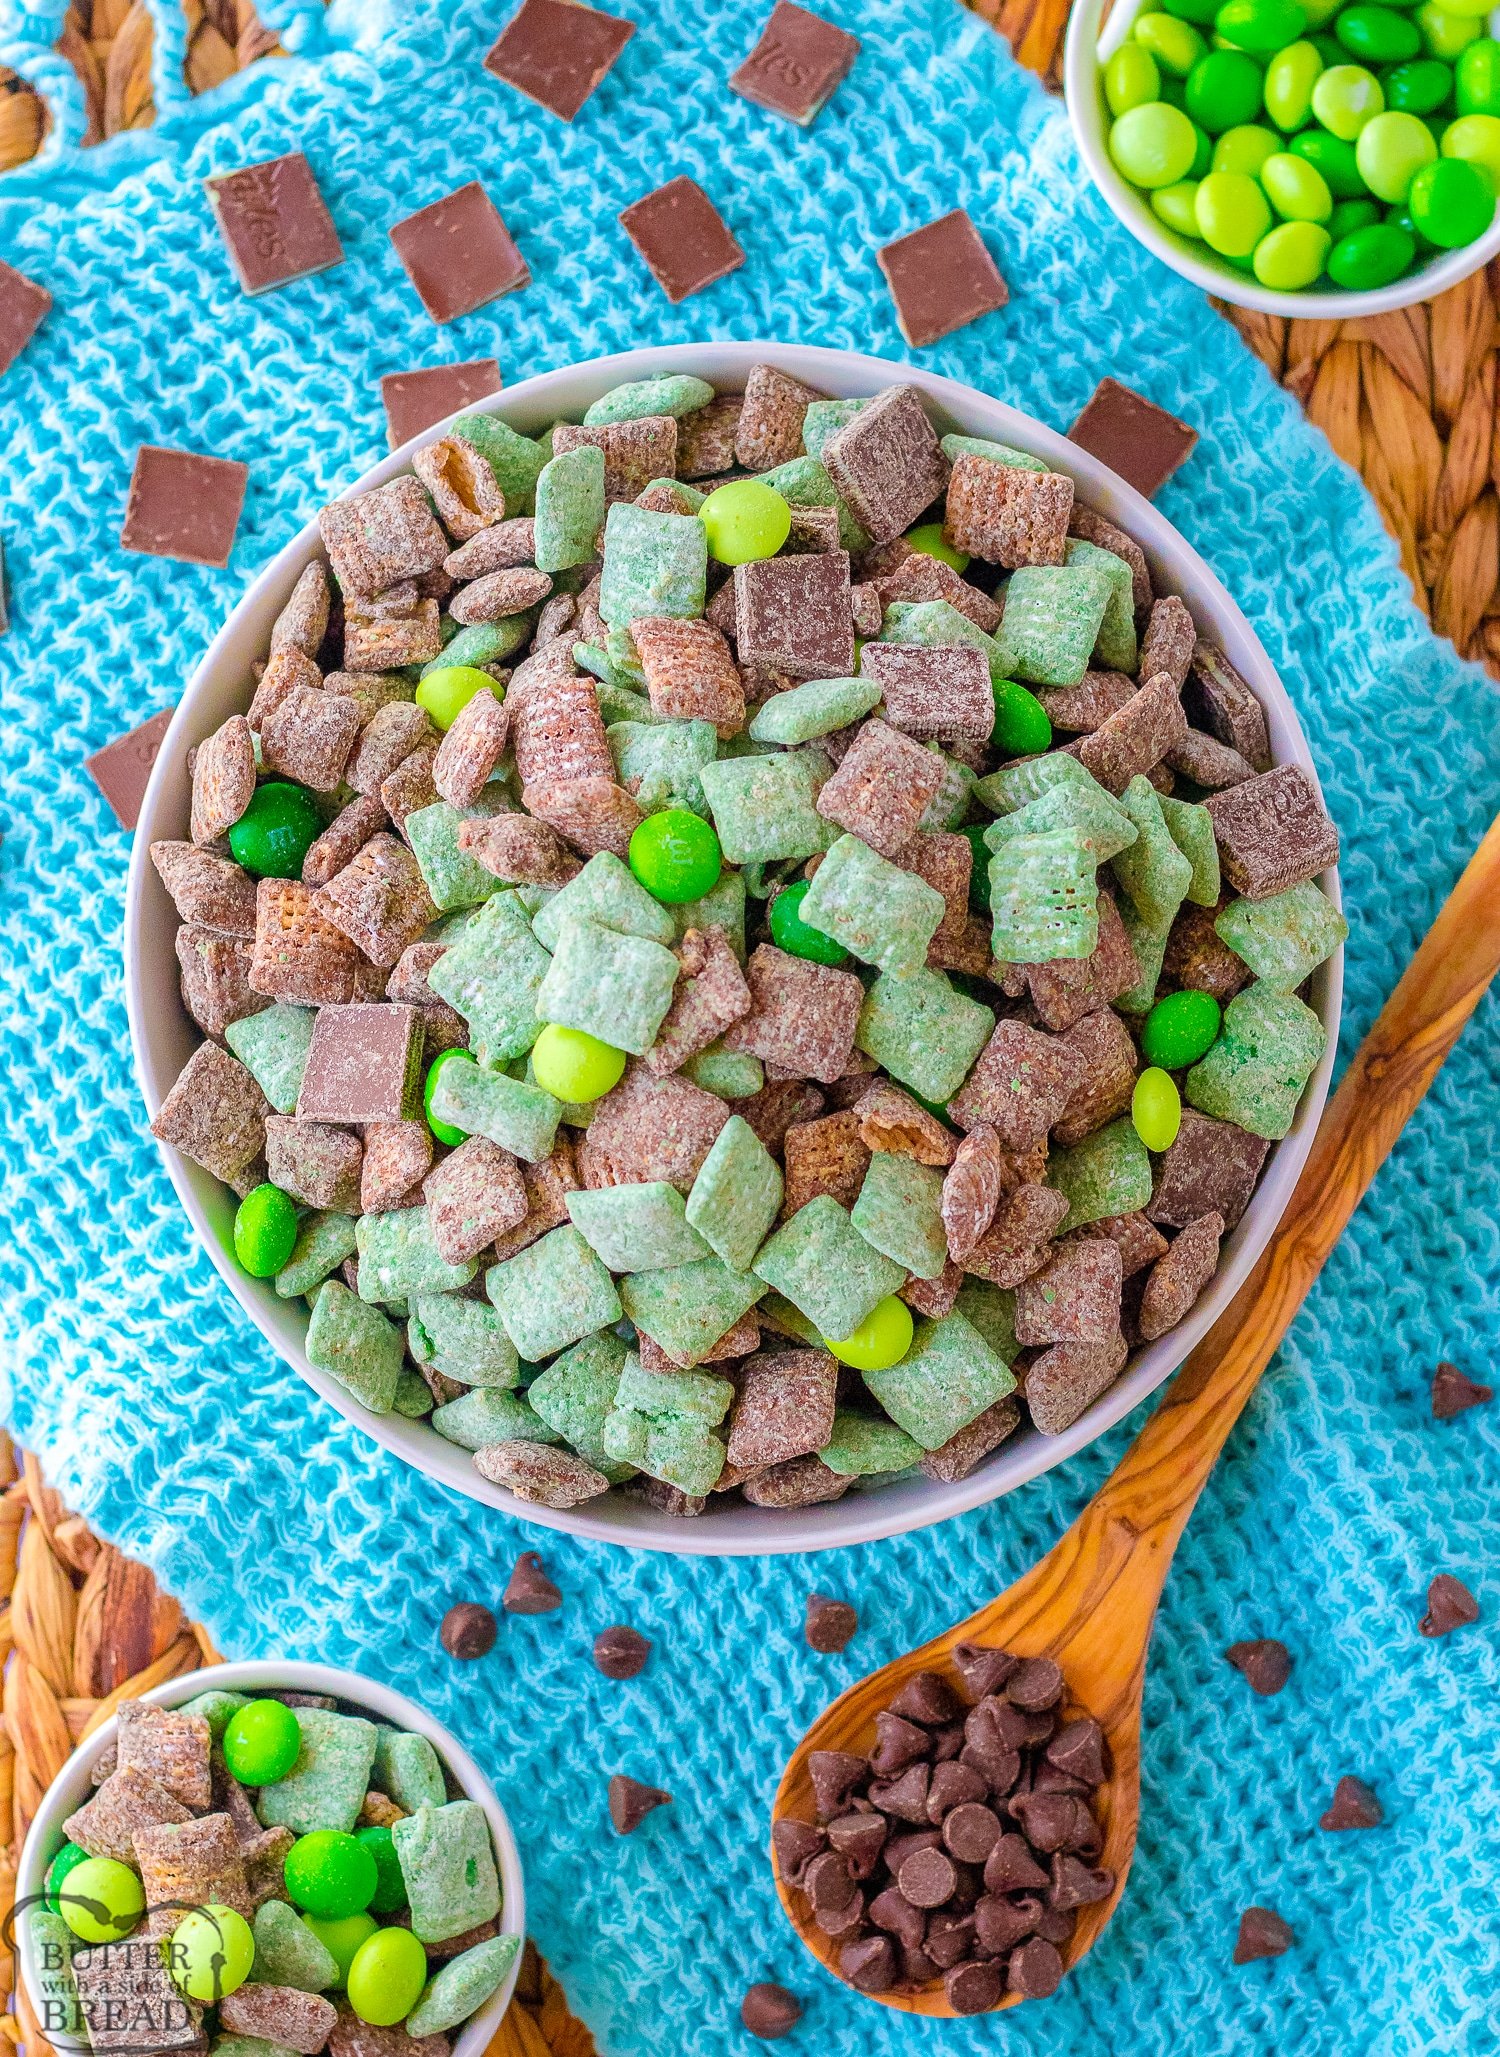 St. Patrick's day mint chocolate Chex mix